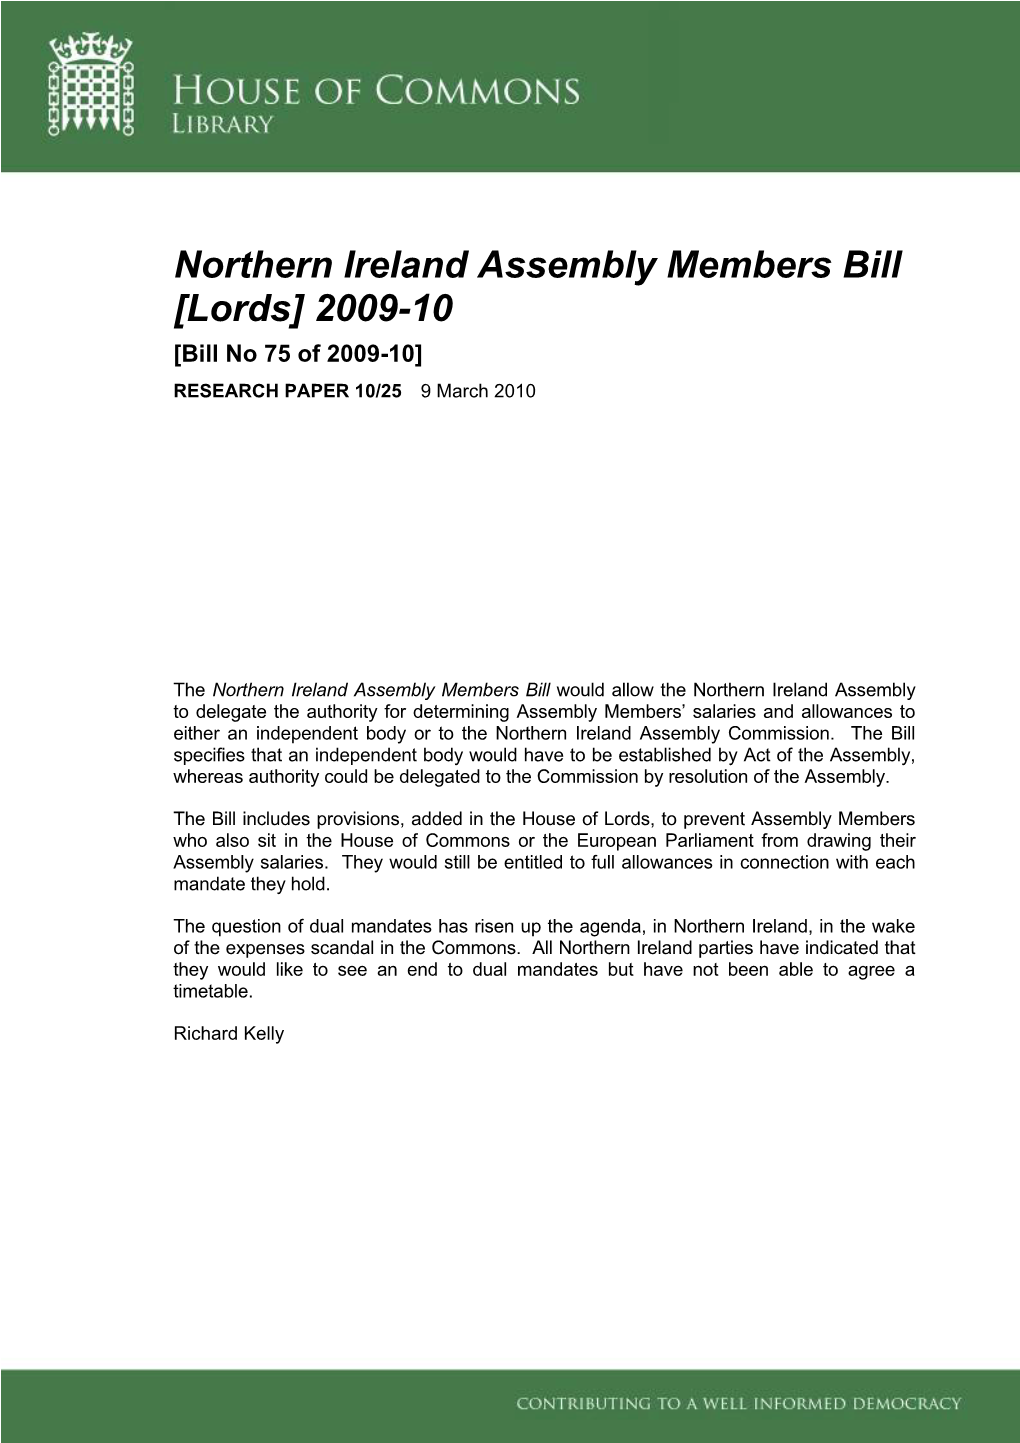 Northern Ireland Assembly Members Bill [Lords] 2009-10 [Bill No 75 of 2009-10] RESEARCH PAPER 10/25 9 March 2010